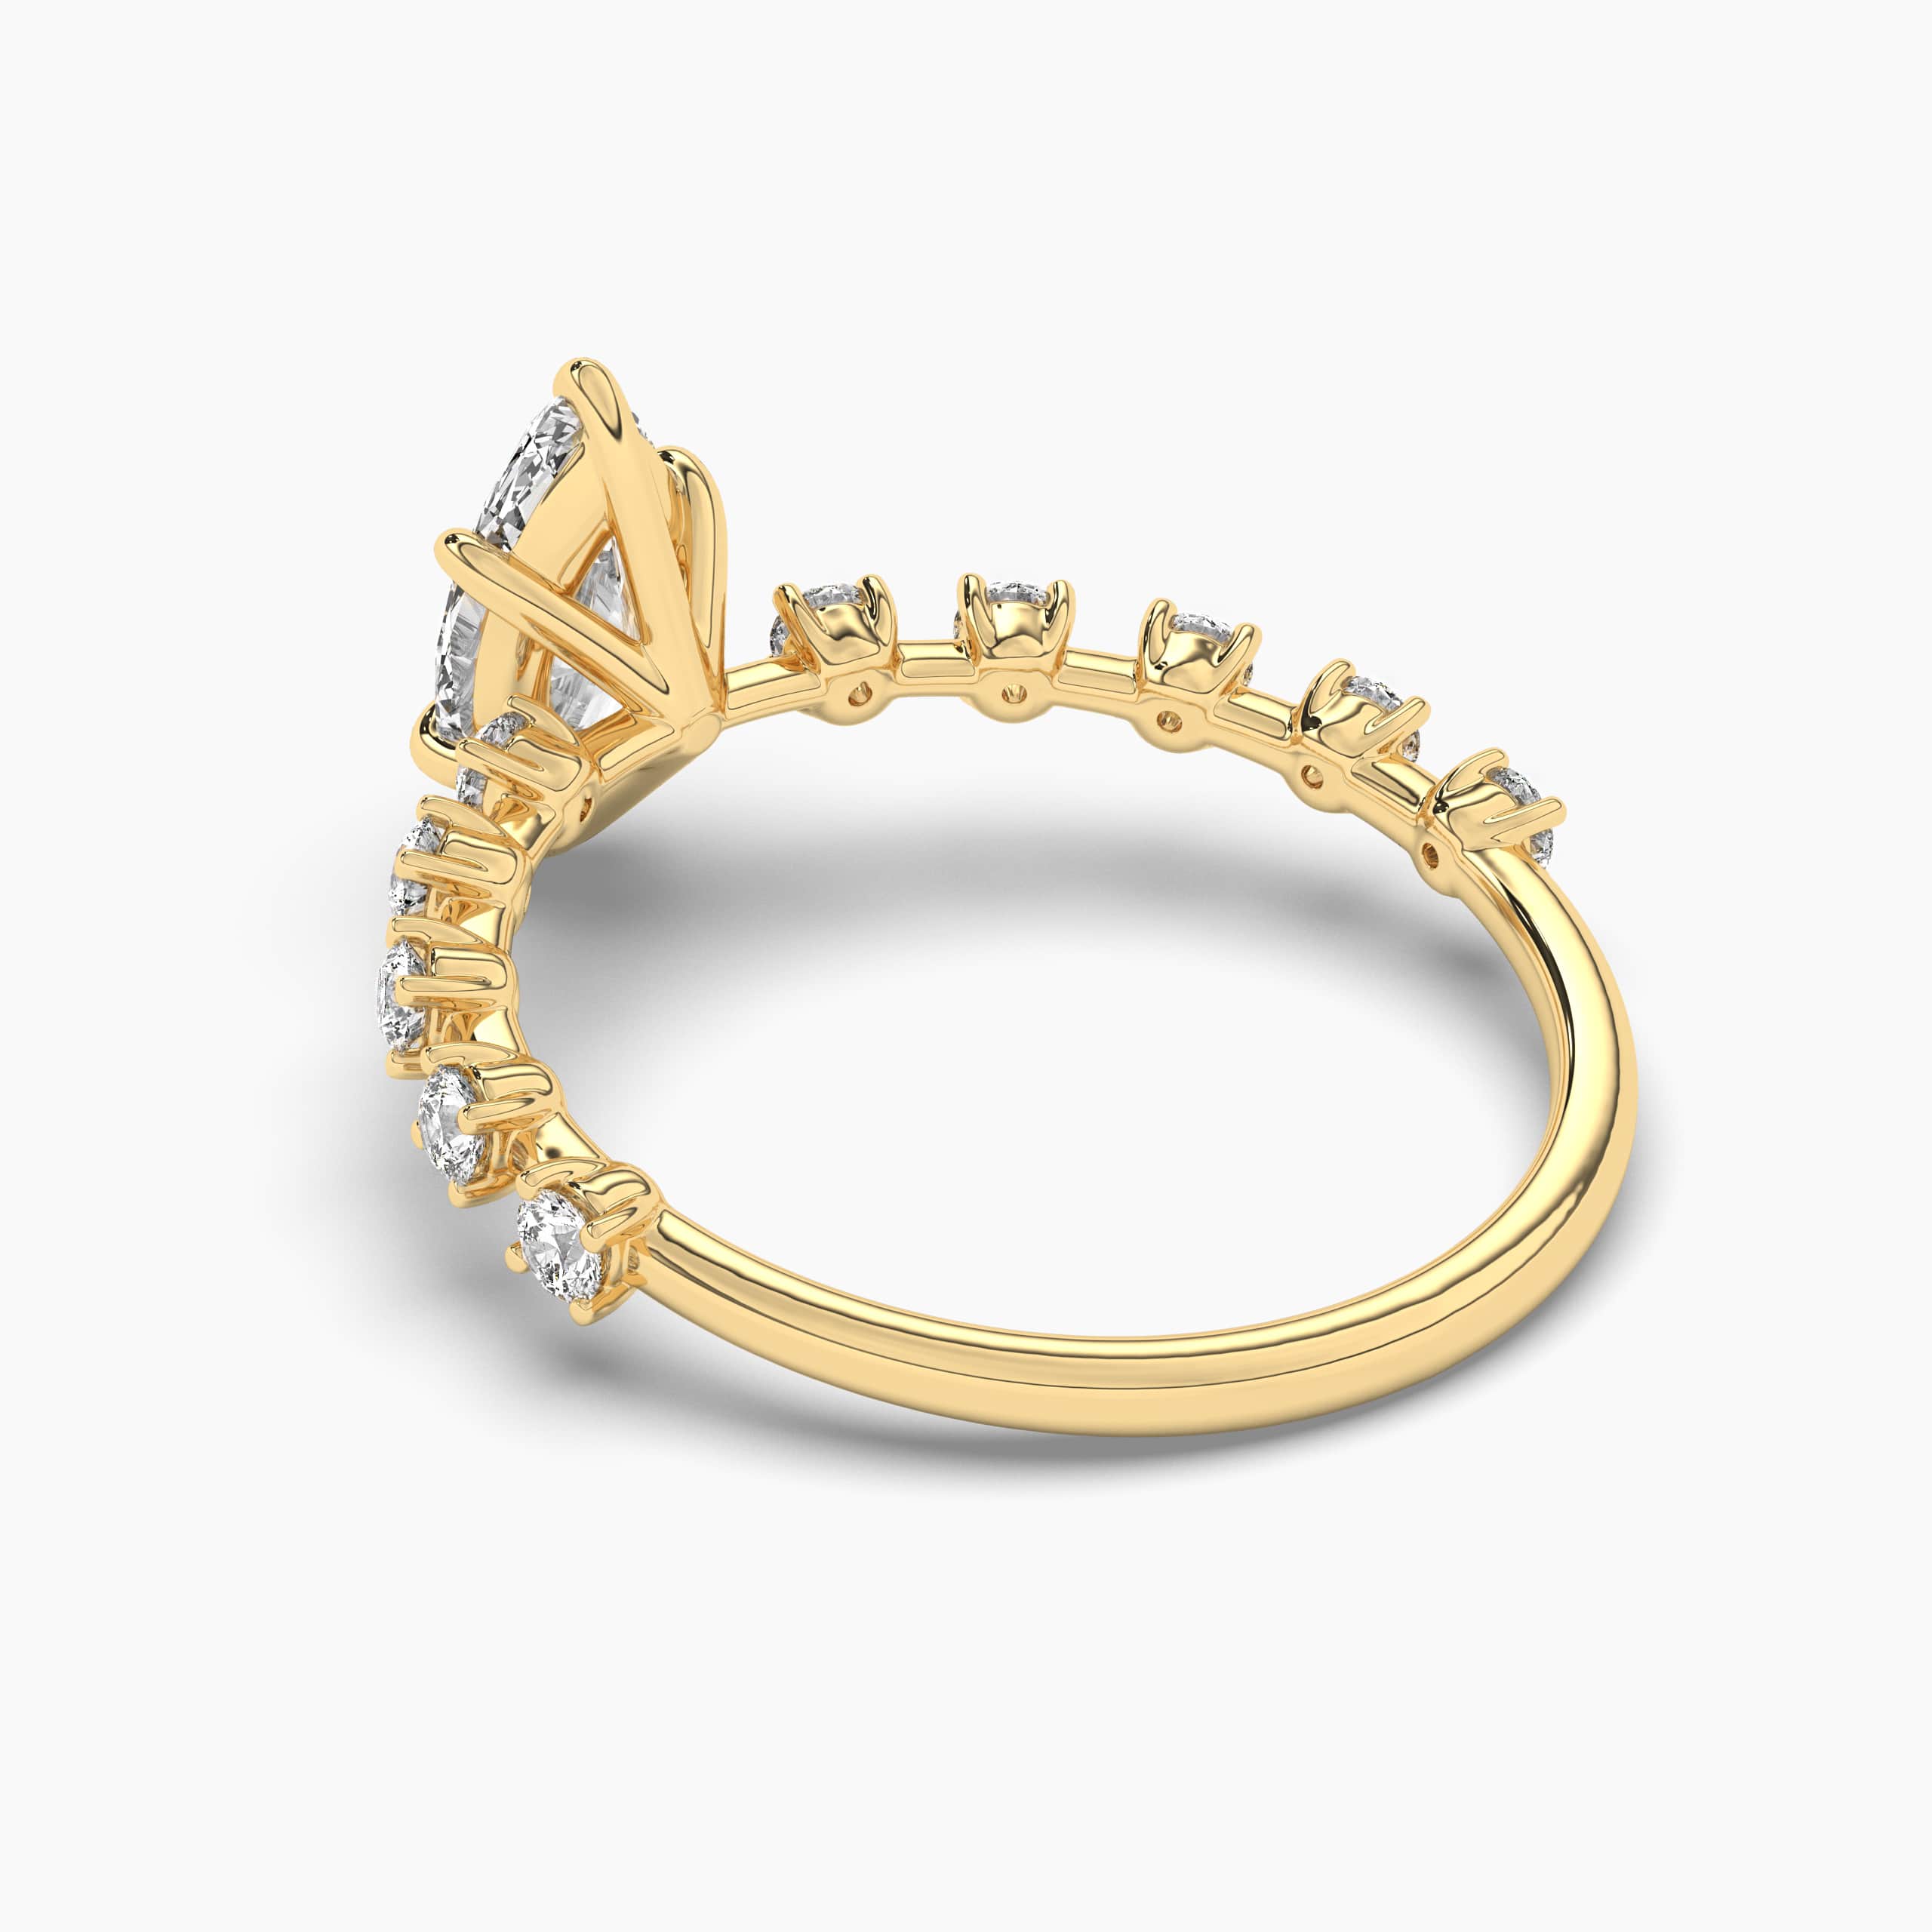 Yellow gold marquise diamond engagement ring